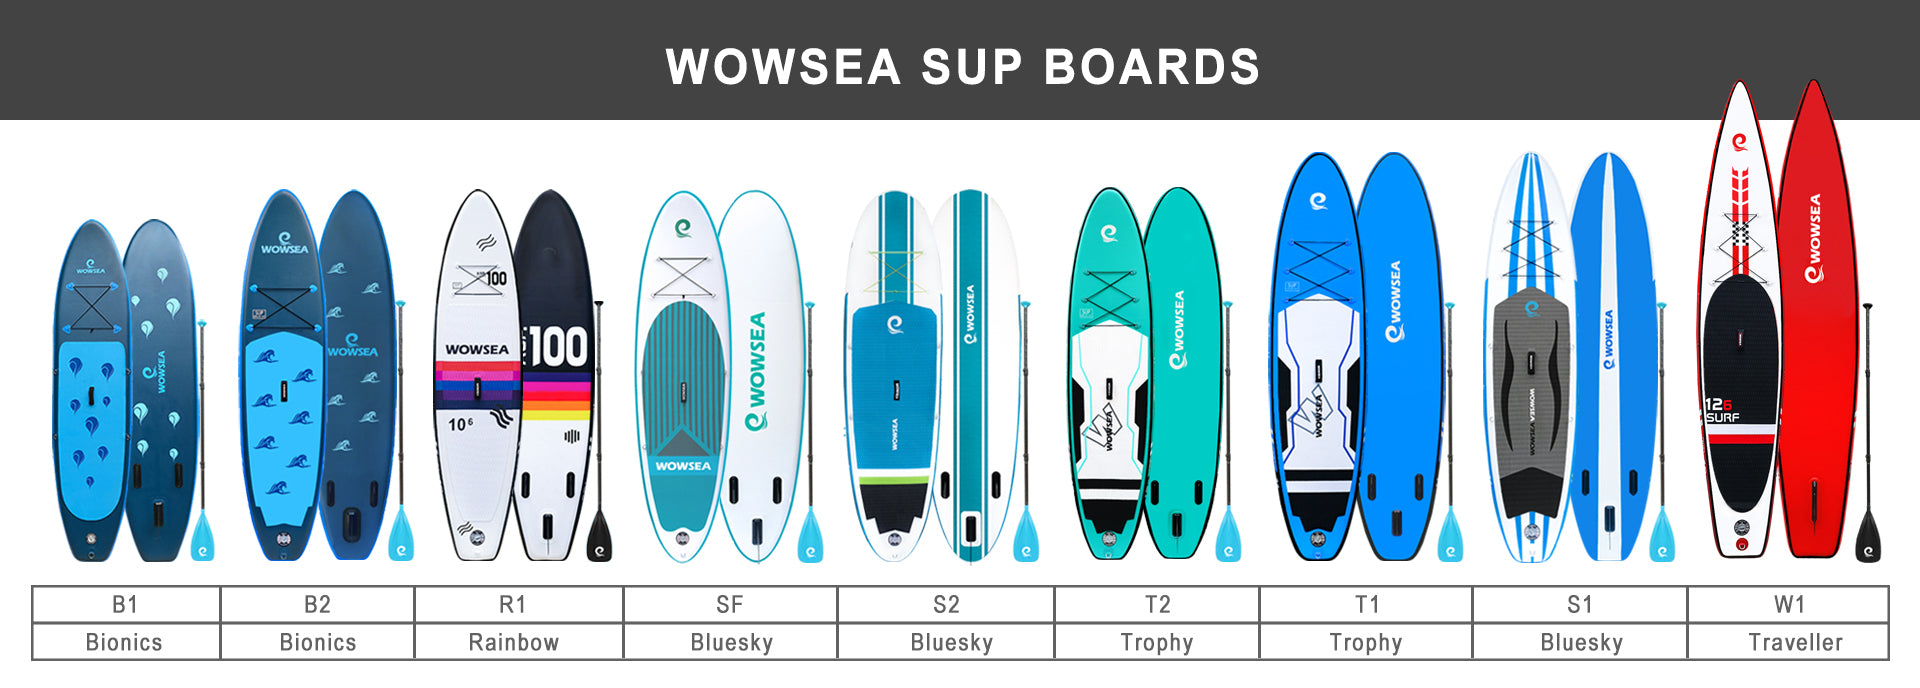 WOWSEA SUP Boards